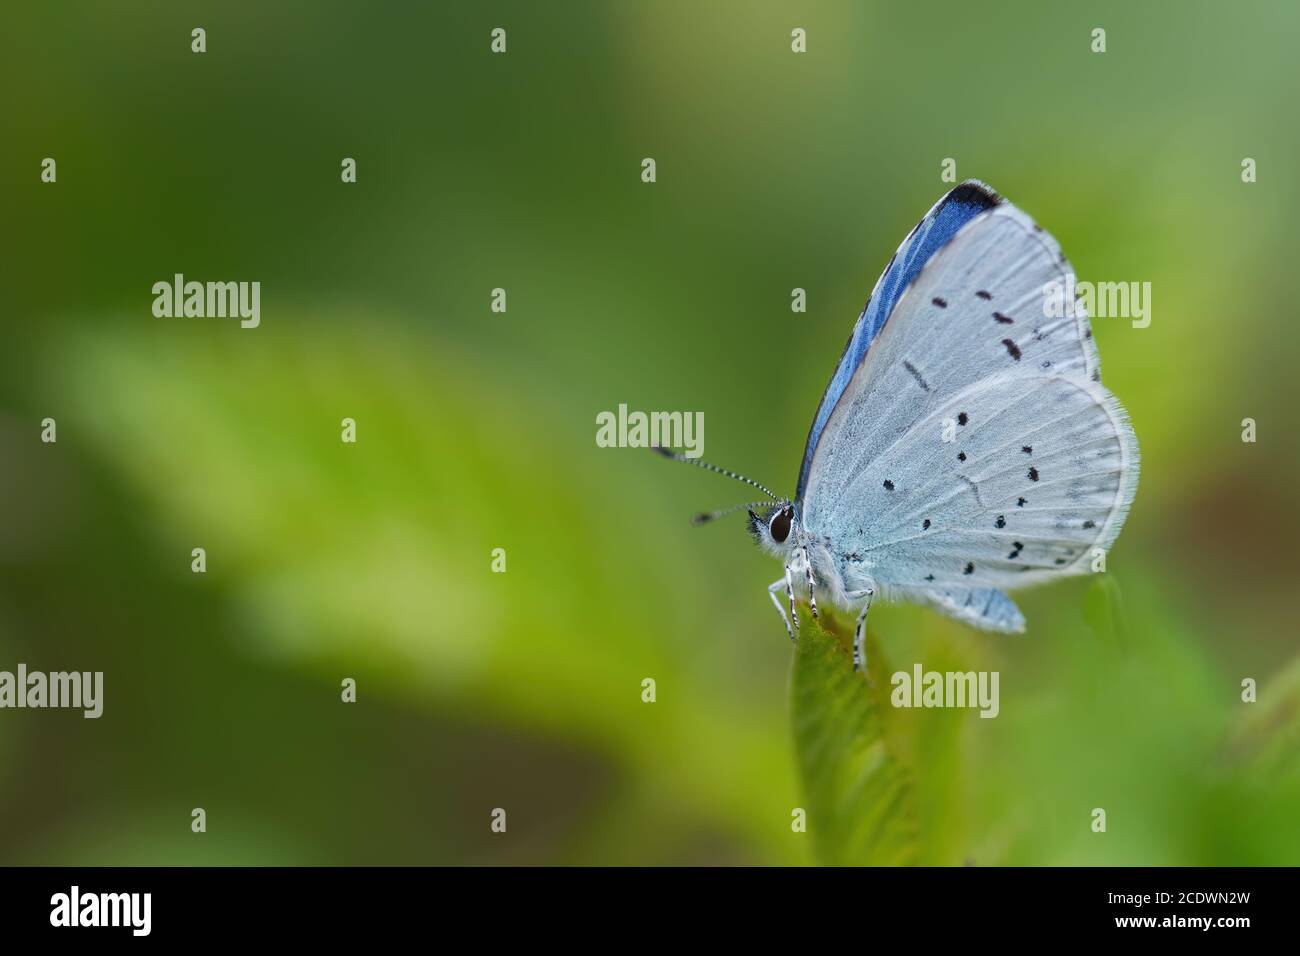 Holly Blue - Celastrina argiolus, beatiful small blue butterfly from European meadows and grasslands, Havraniky, Czech Republic. Stock Photo